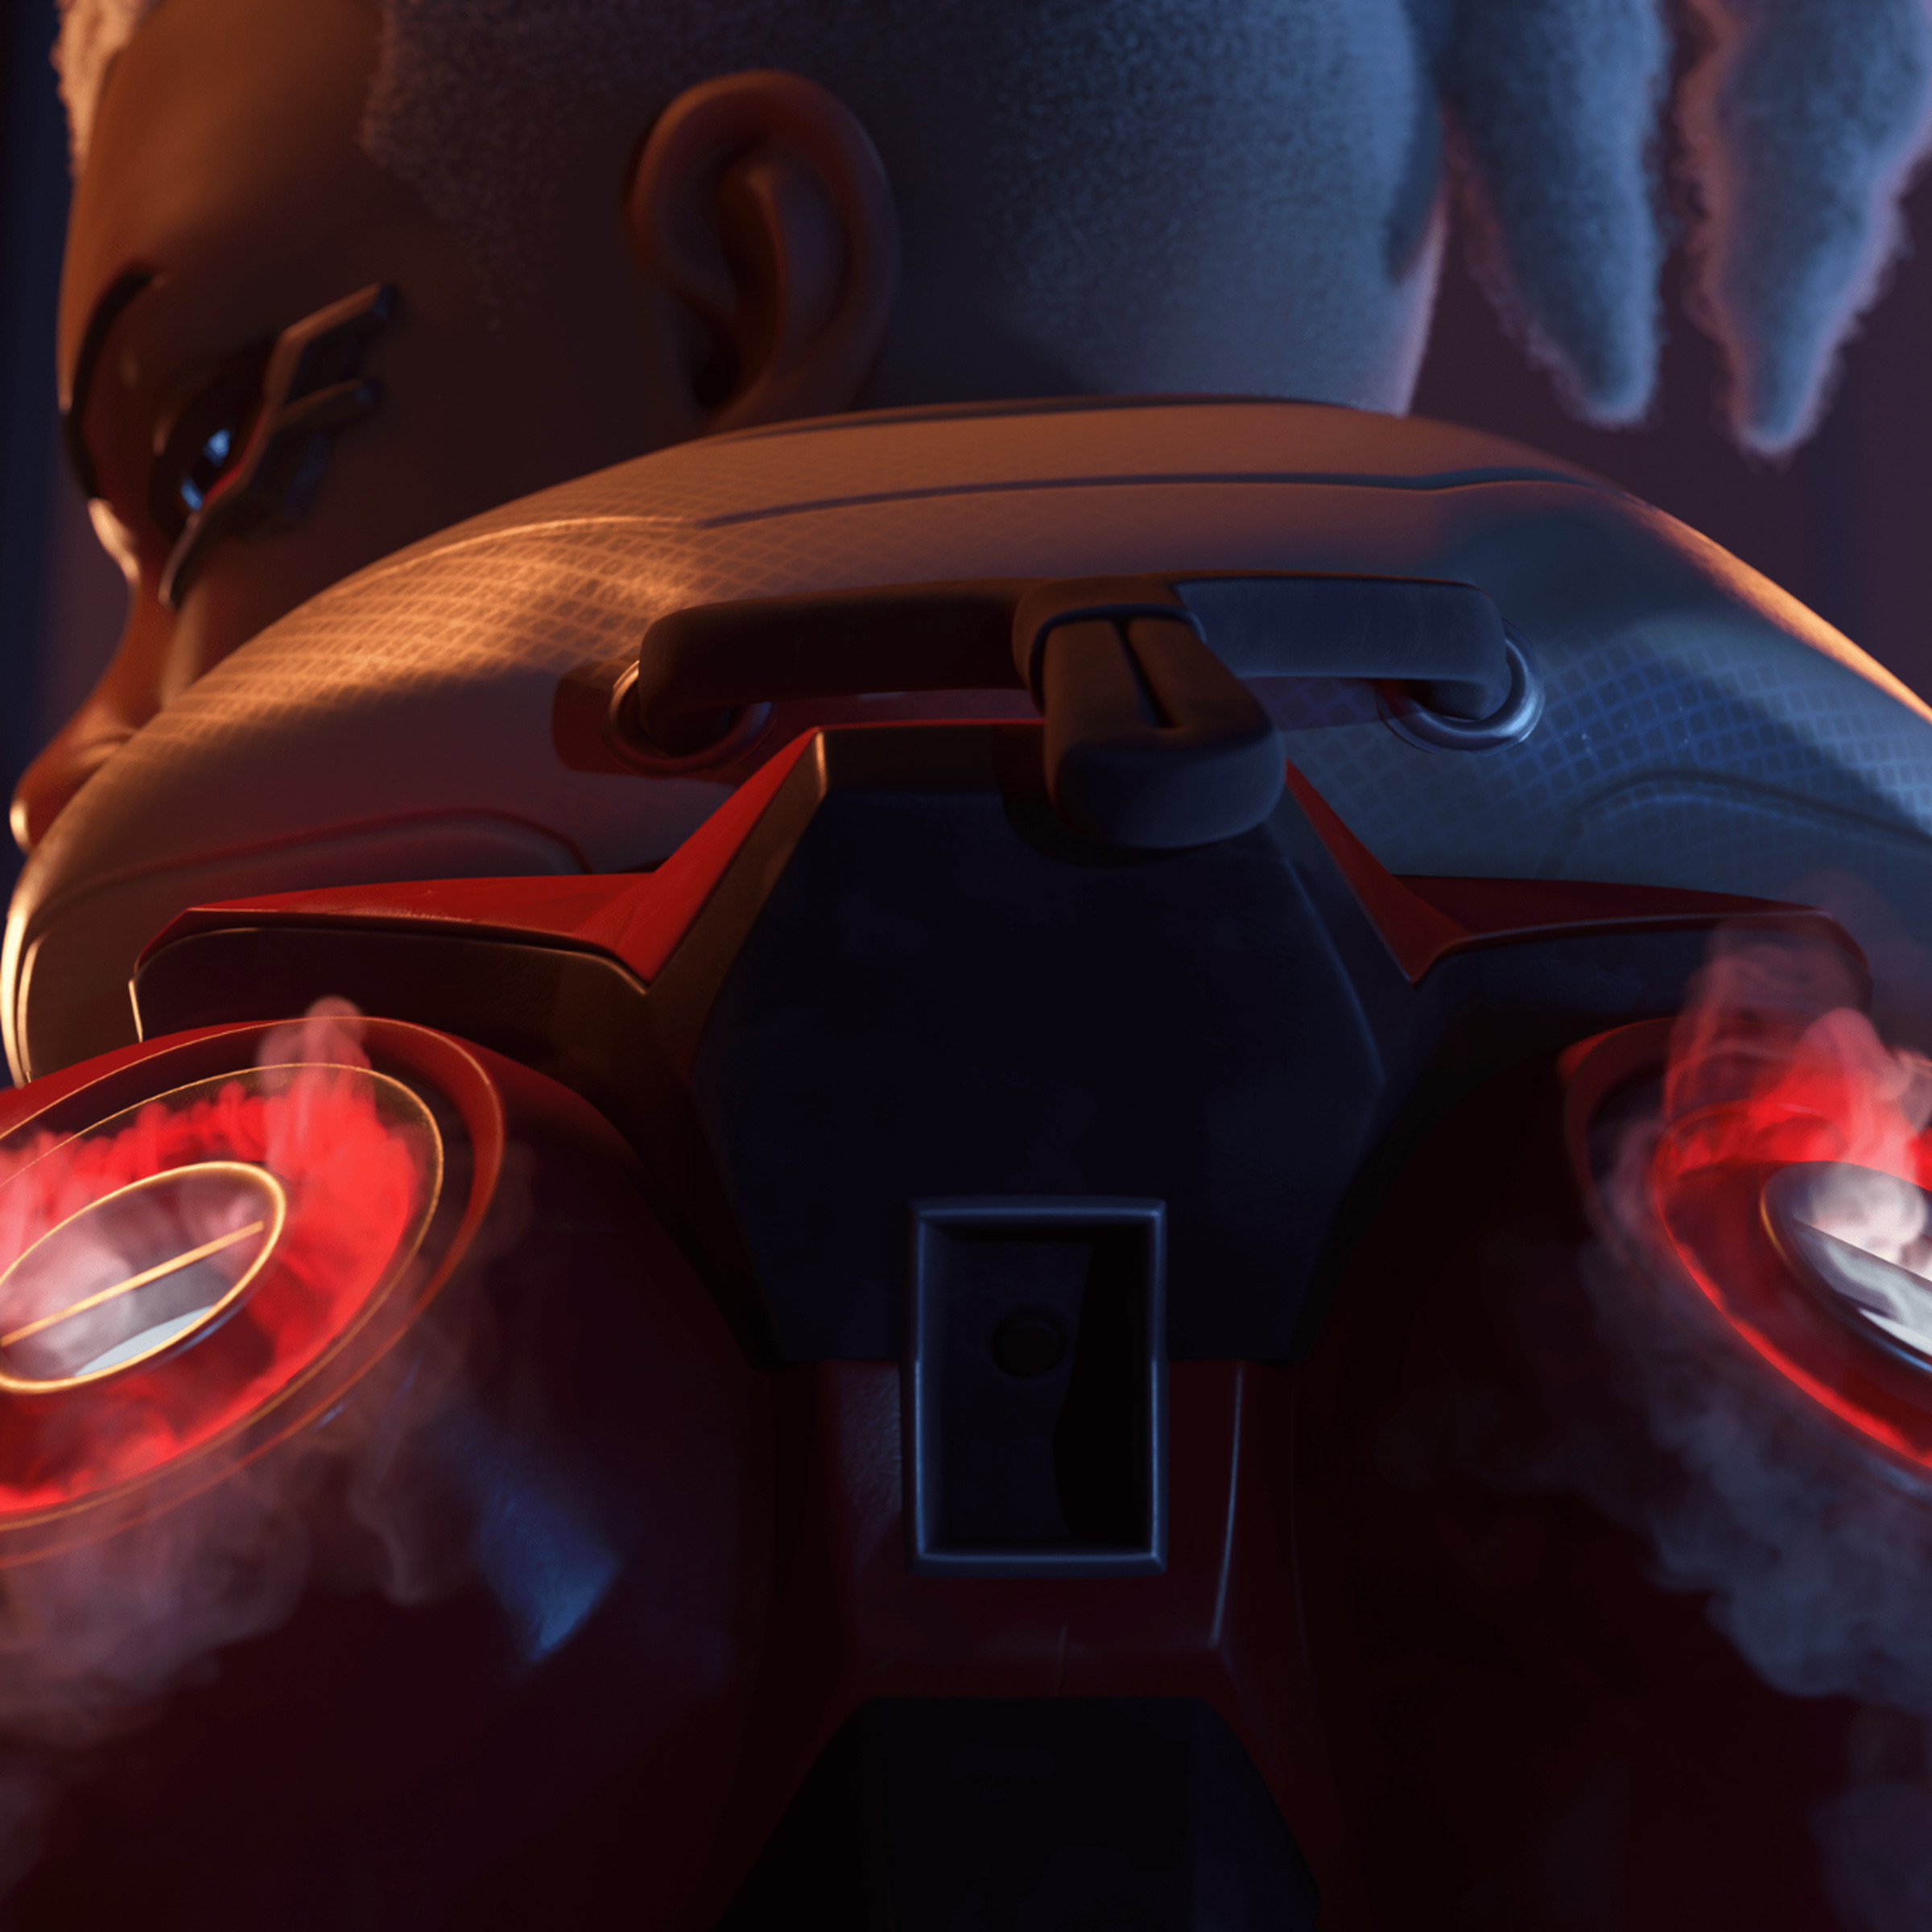 Screenshot from Overwatch 2 featuring the hero Sojourn, a female African Canadian hero with a fully cybernetic body